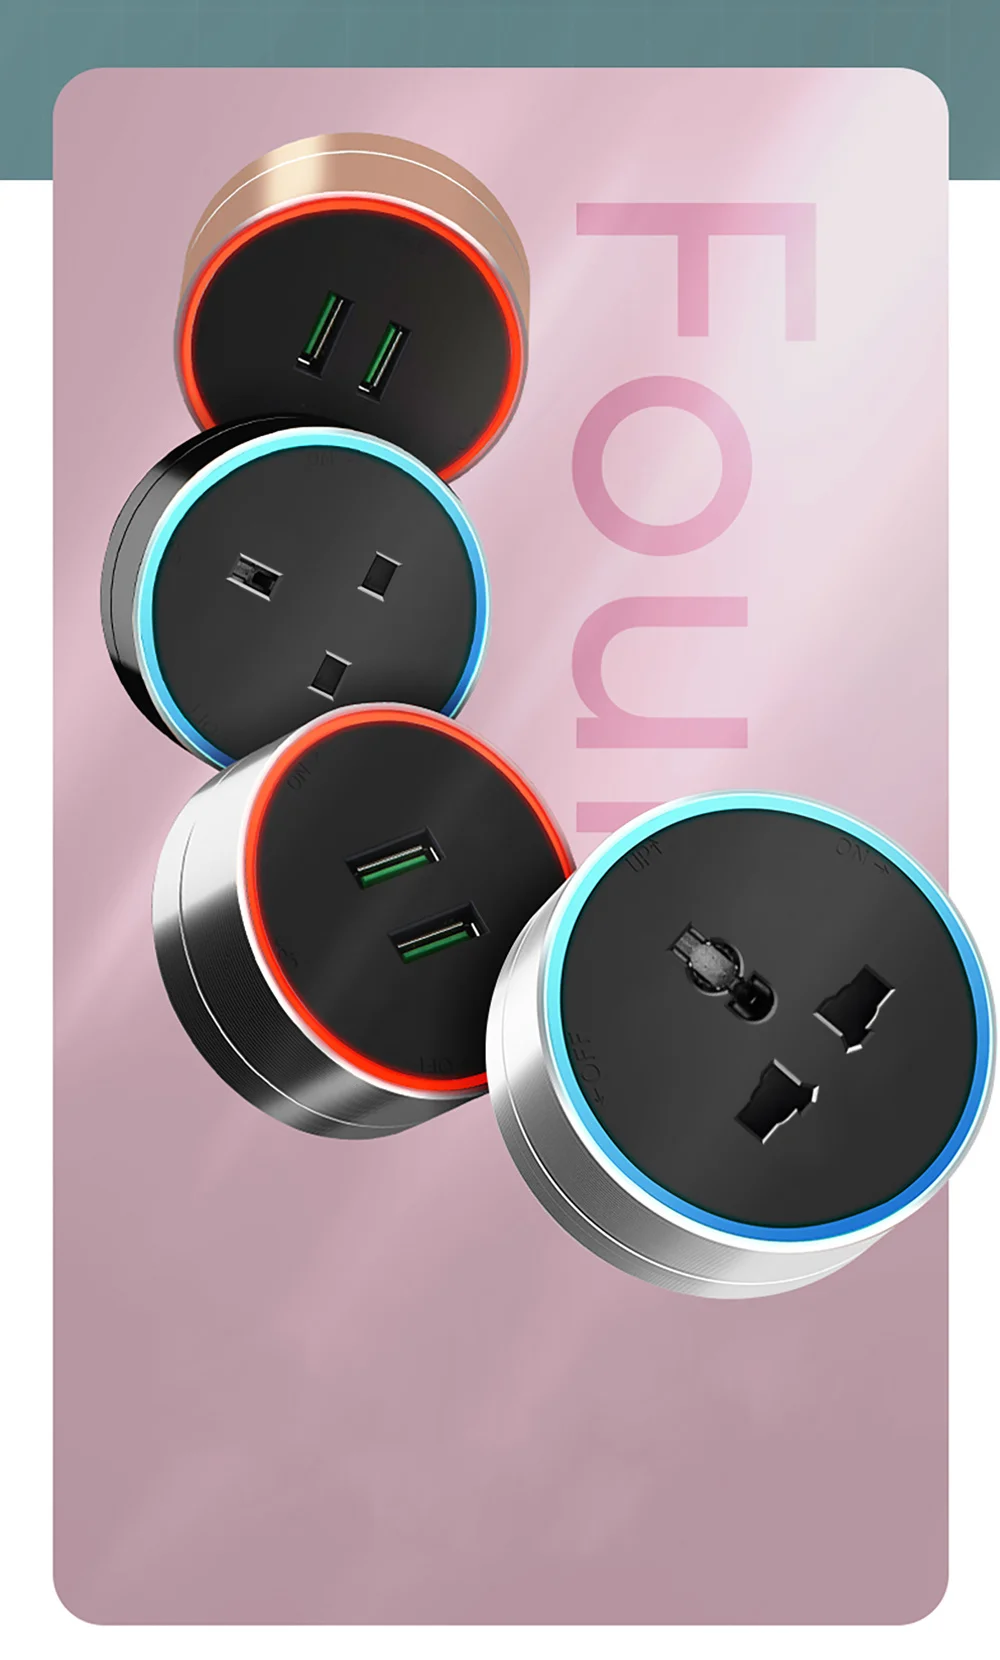 H06fe4730eae747a082572fb0655cdb68w Herepow Power Track Socket Smart Home Kitchen Multi-Function Track Outlets Switch Pop Wall Electrical Plug UK USB Round Sockets